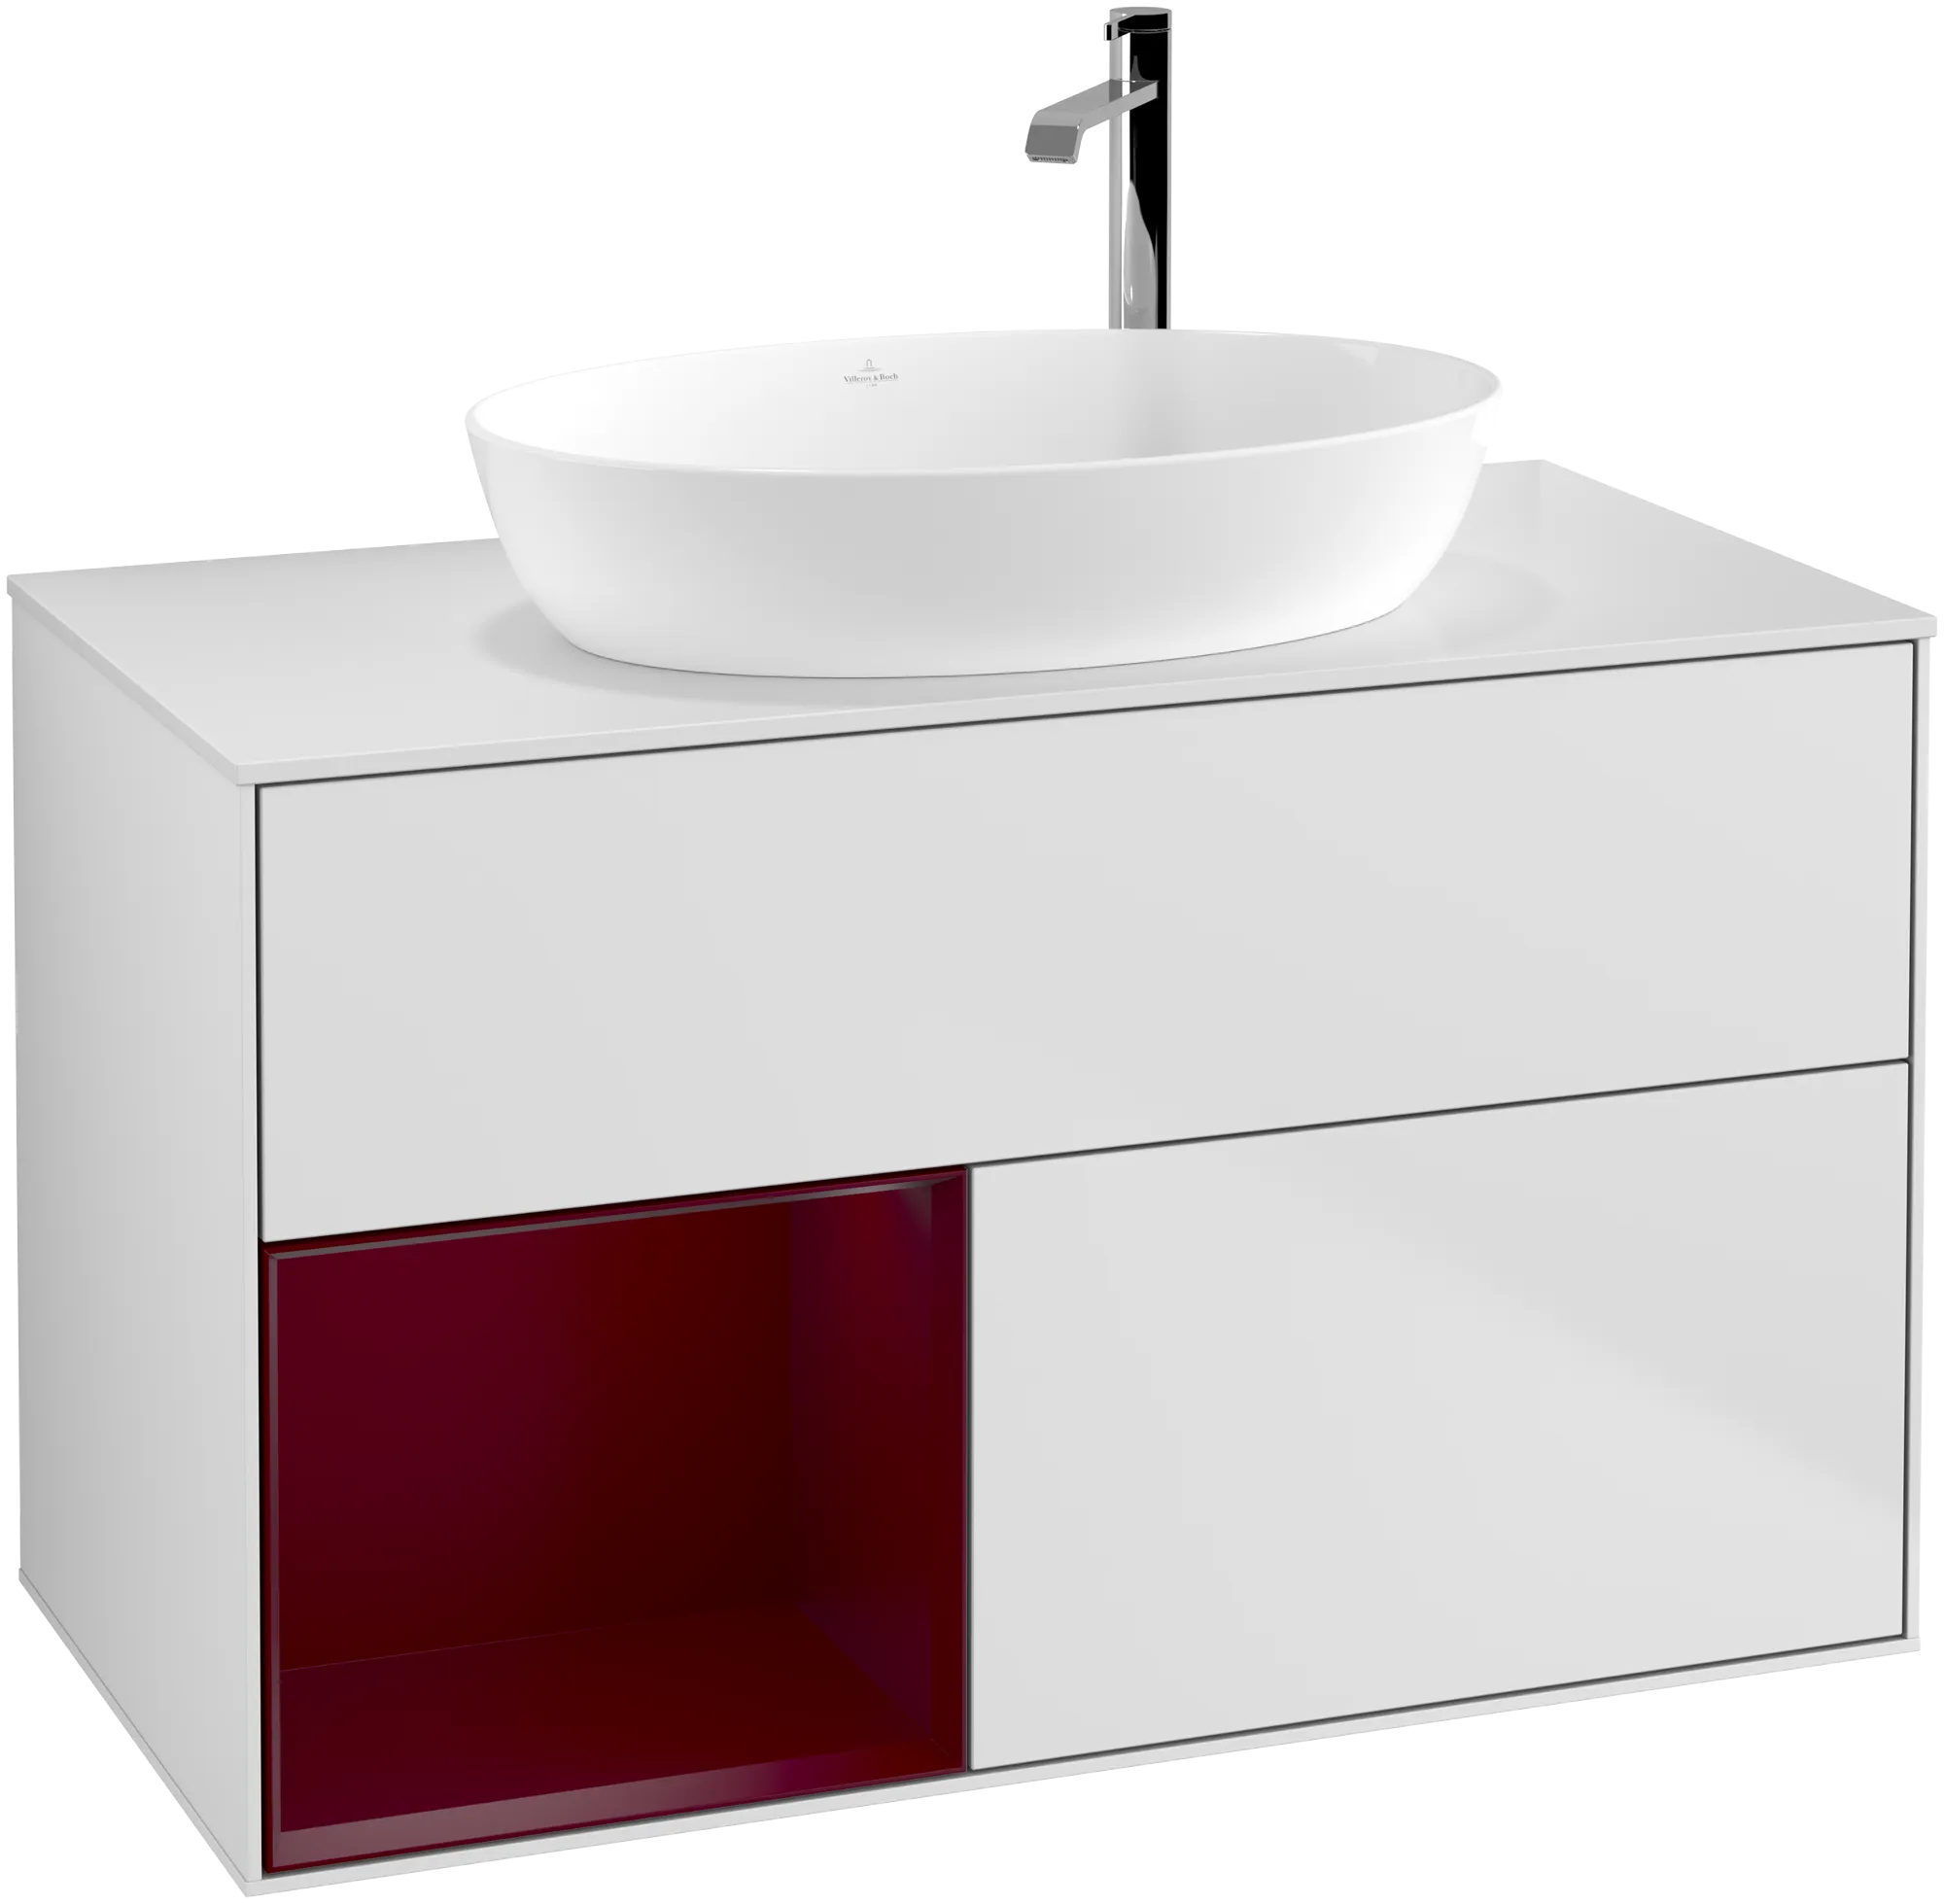 VILLEROY BOCH Finion Vanity unit, with lighting, 2 pull-out compartments, 1000 x 603 x 501 mm, White Matt Lacquer / Peony Matt Lacquer / Glass White Matt #G891HBMT resmi